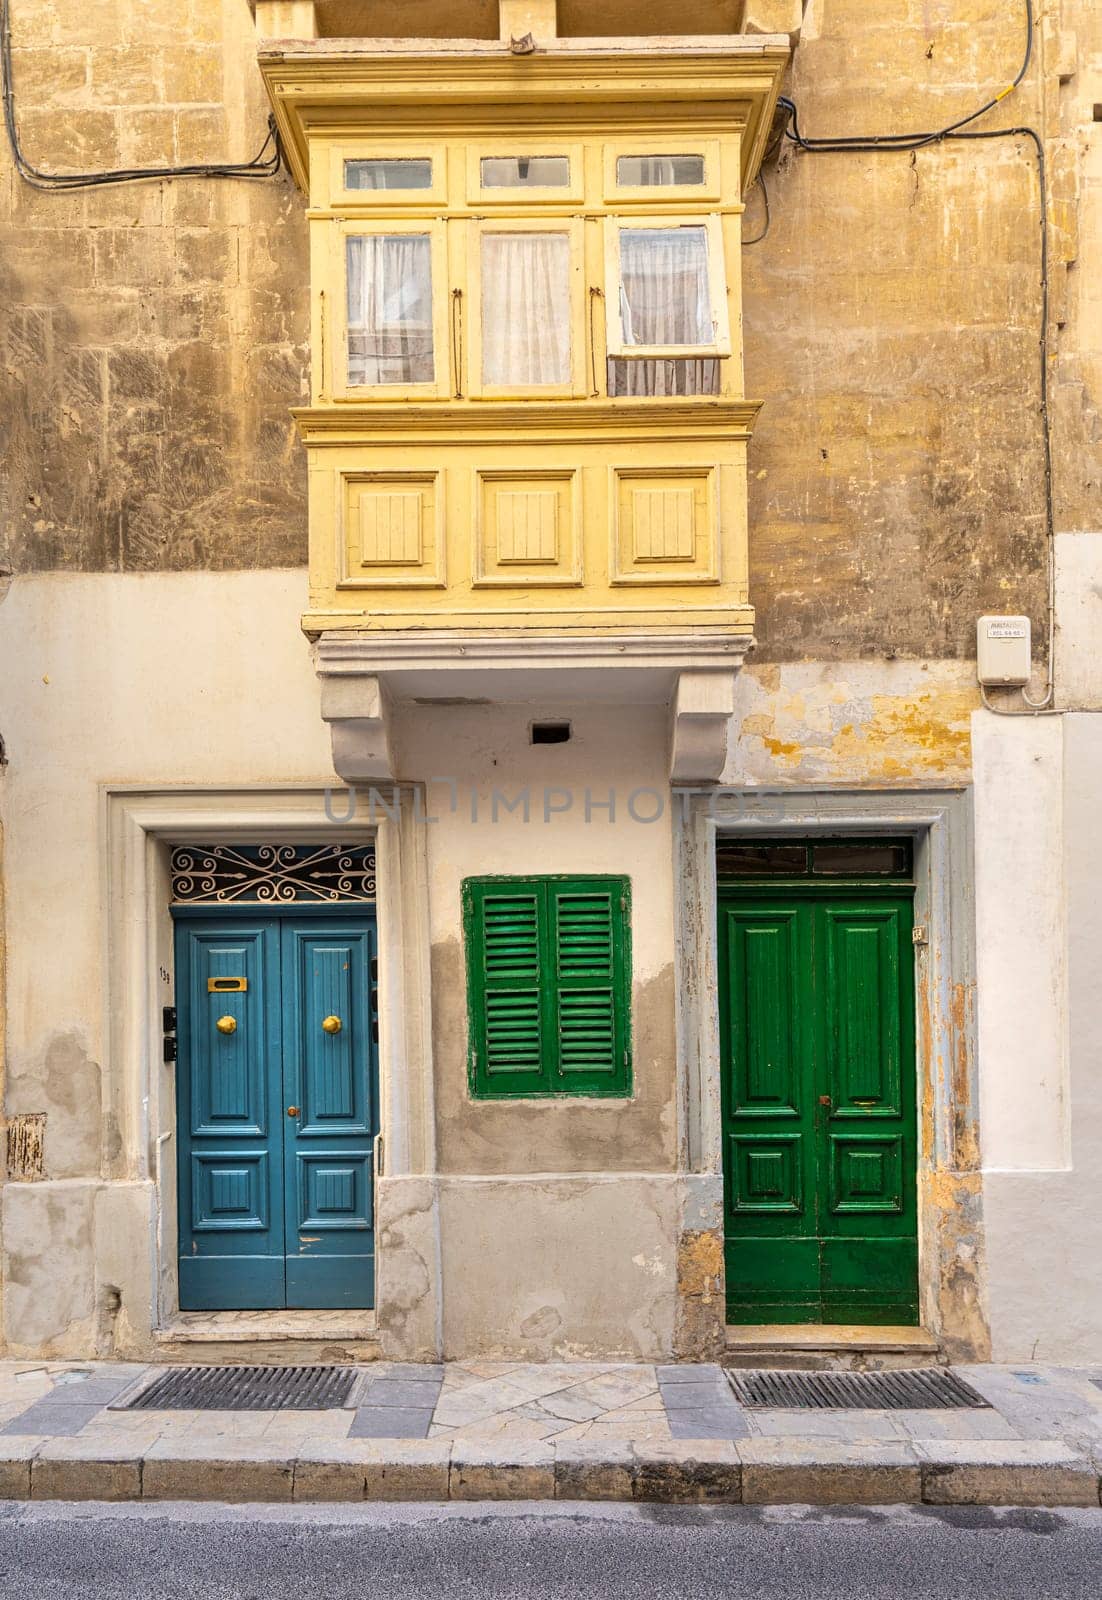 typical entrance doors of houses in by sergiodv